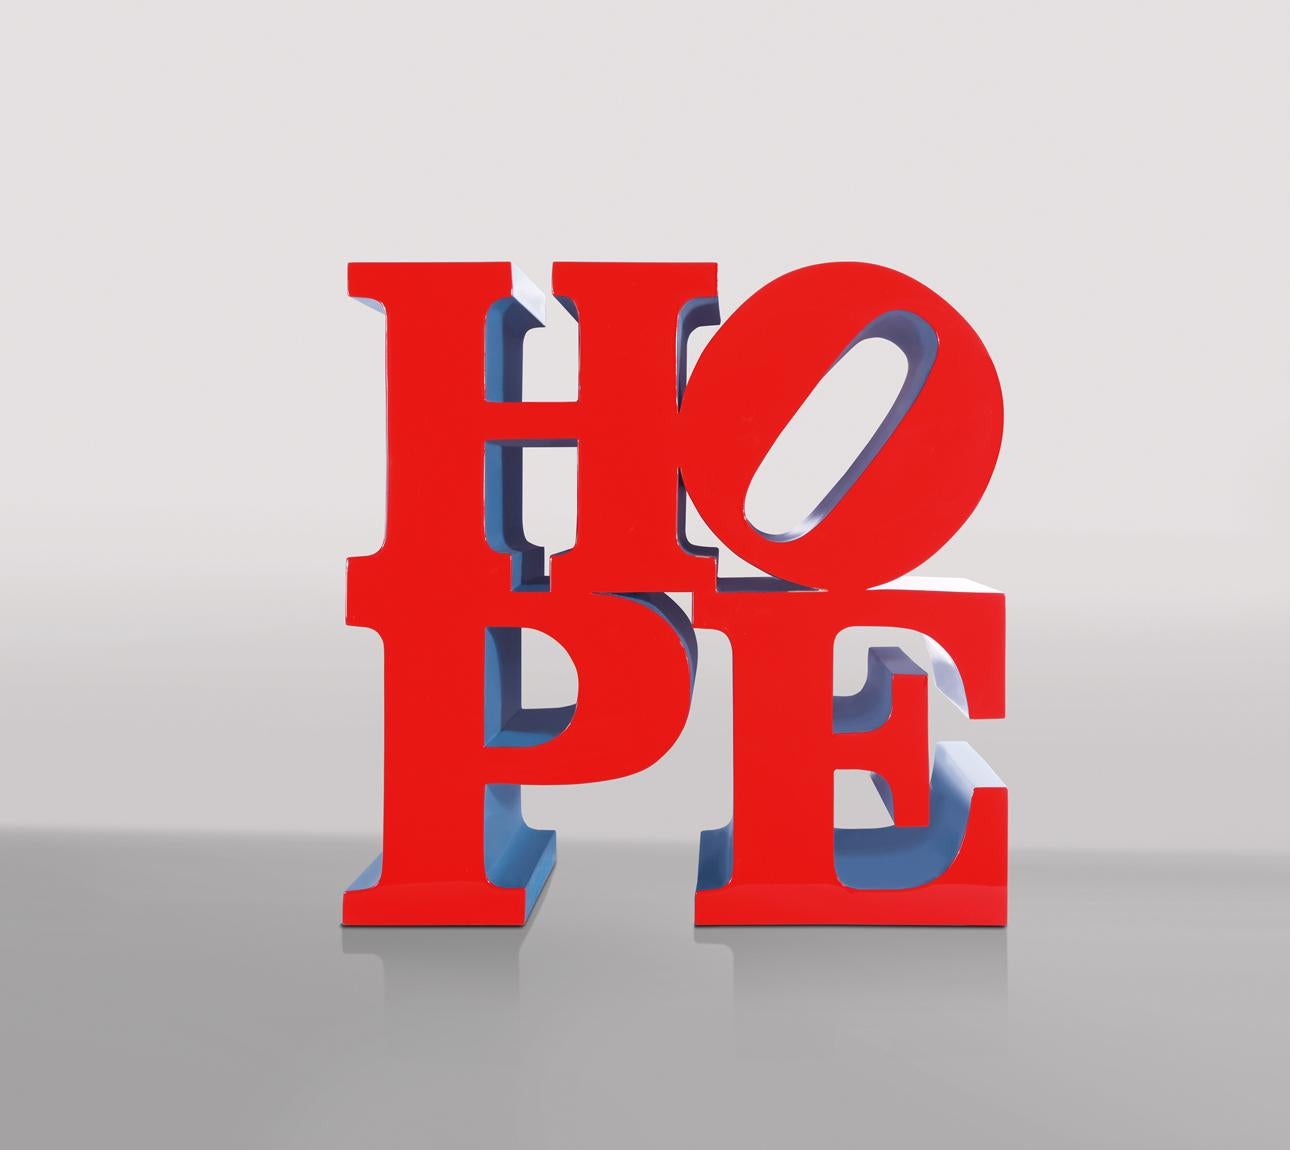 HOPE - sculpture, red, blue, shiny